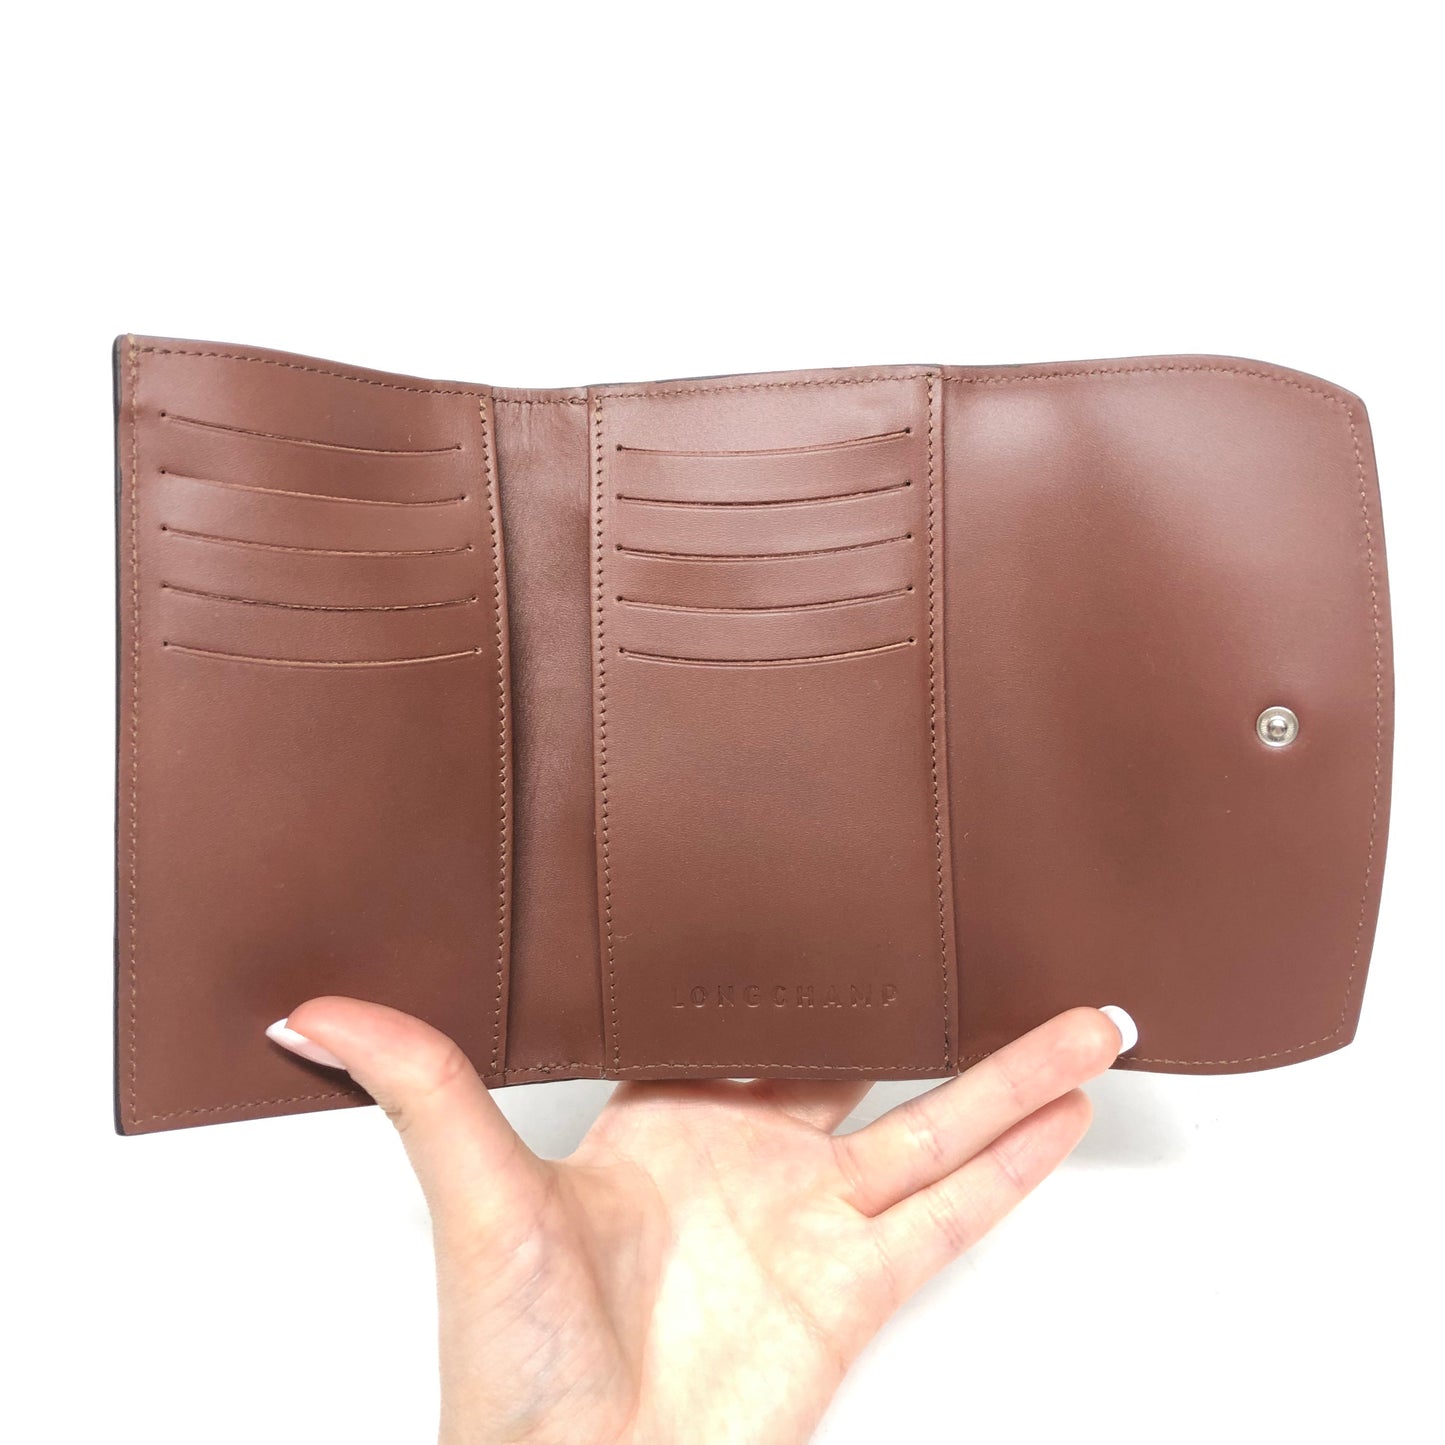 Wallet Designer By Longchamp  Size: Small